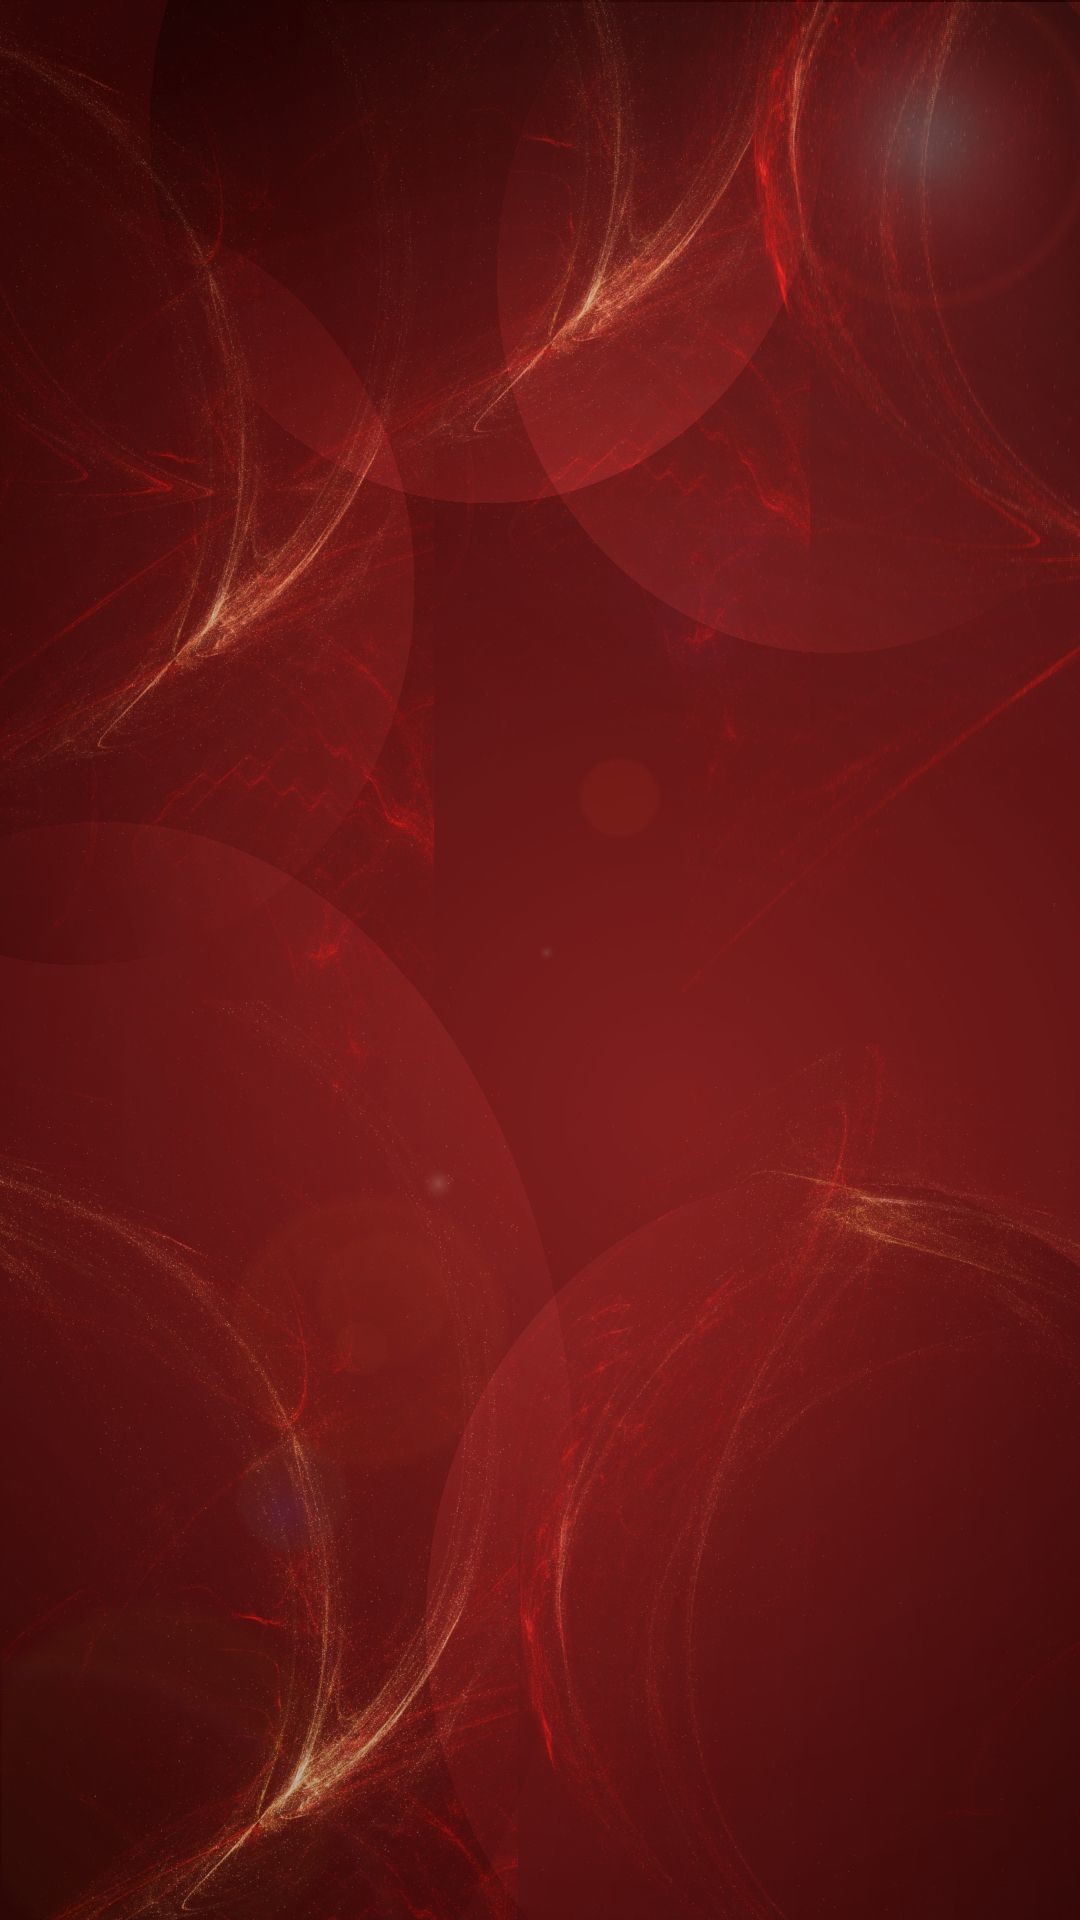 1080x1920 Red spheres and lights with dark red background,  (9/16).